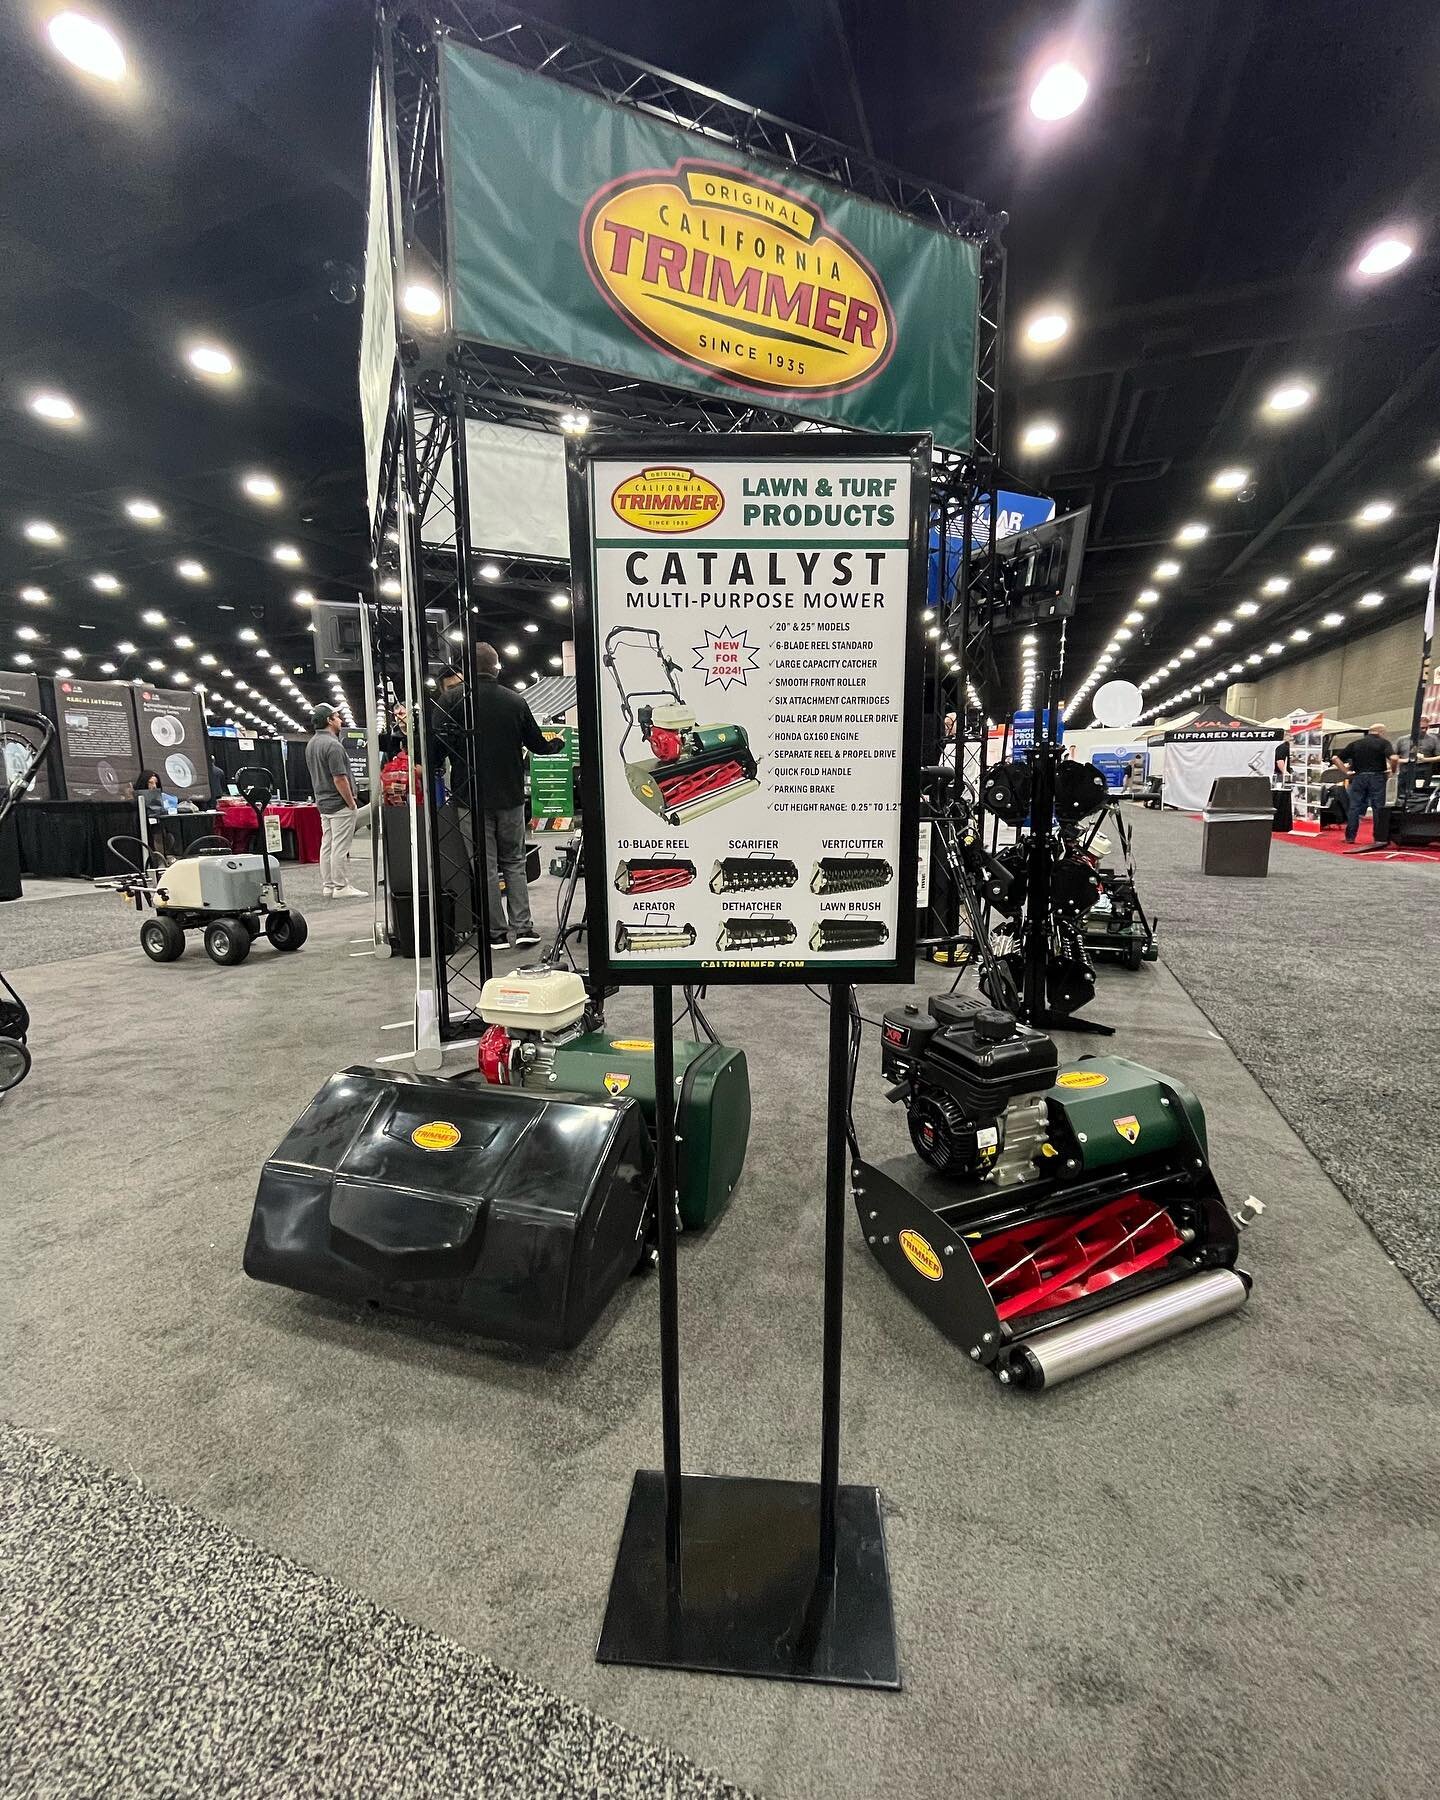 Come check us out @ the GIE EXPO in Louisville! We&rsquo;ve got something new to share!
.
.
.
#triangleREELmowers #REELmower #CaliforniaTrimmer #CalTrimmer #turfgrass #bermudagrass #zoysiagrass #golfcourselawn #loveyourlawn #lawncare